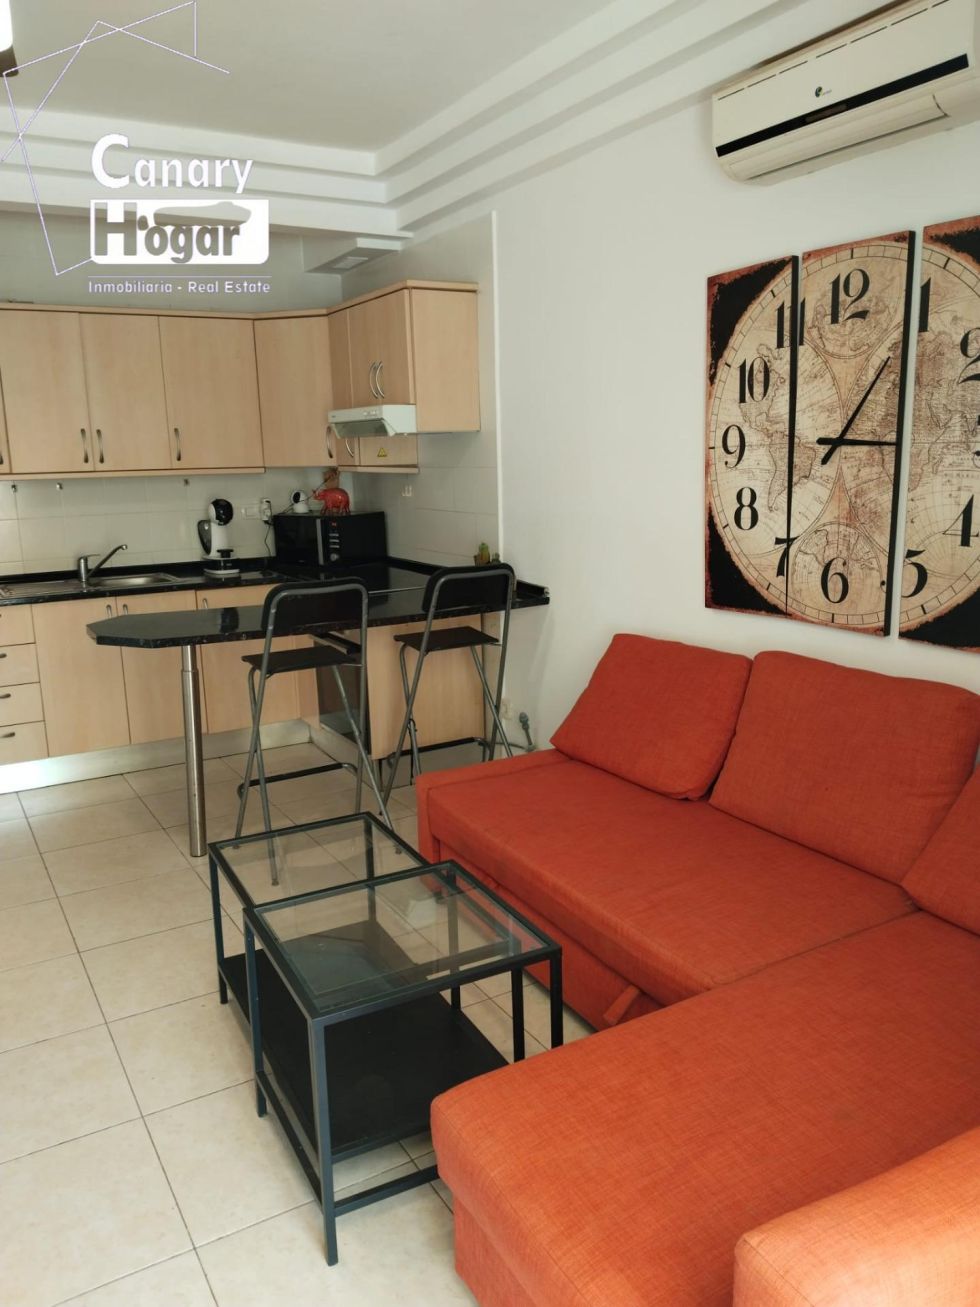 Apartment for sale in  Costa Adeje, Spain - 053861